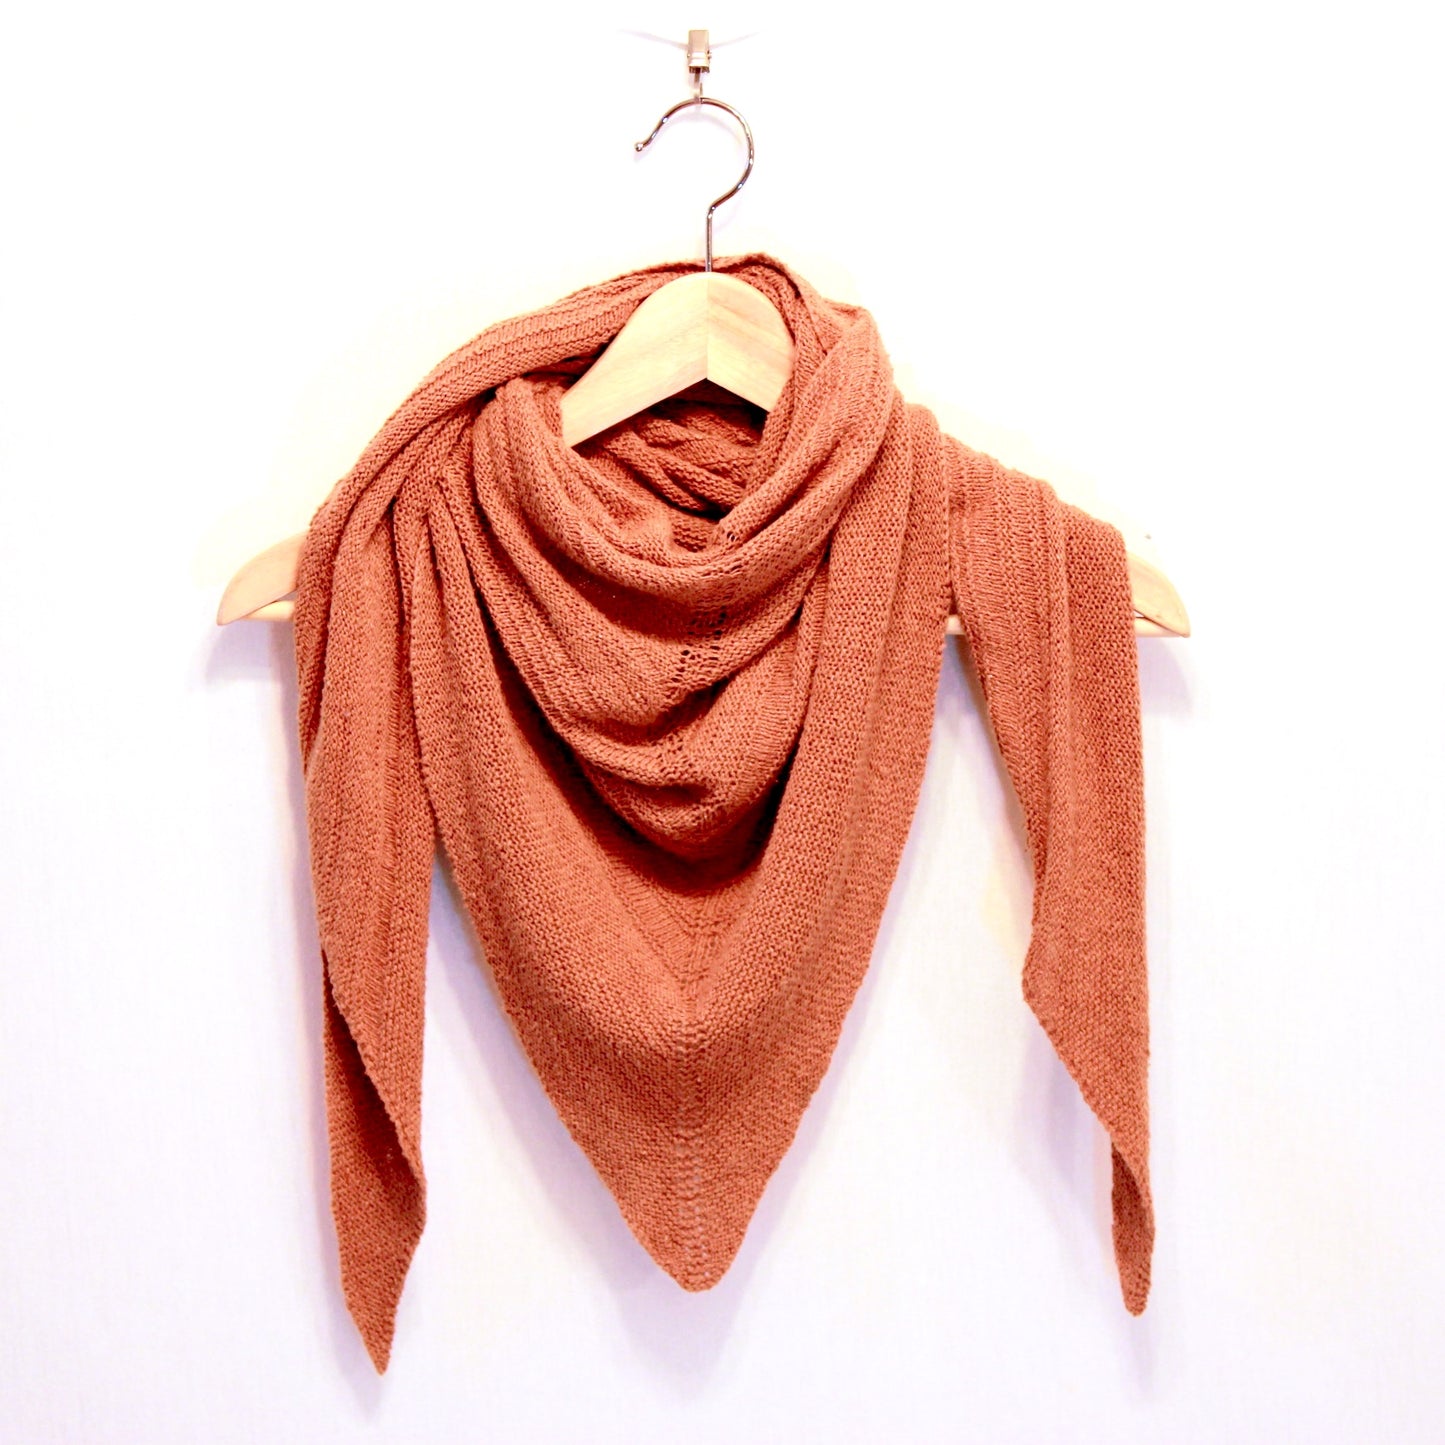 Deneb Shawl - Vegan Yarn - A generously sized triangular shawl wrapped kerchief style on a wooden hanger. Randomly alternating knit and purl rows create an organic texture on the surface that minimal and cozy. The colour is a warm ruddy brown made using Pakucho rust lace.